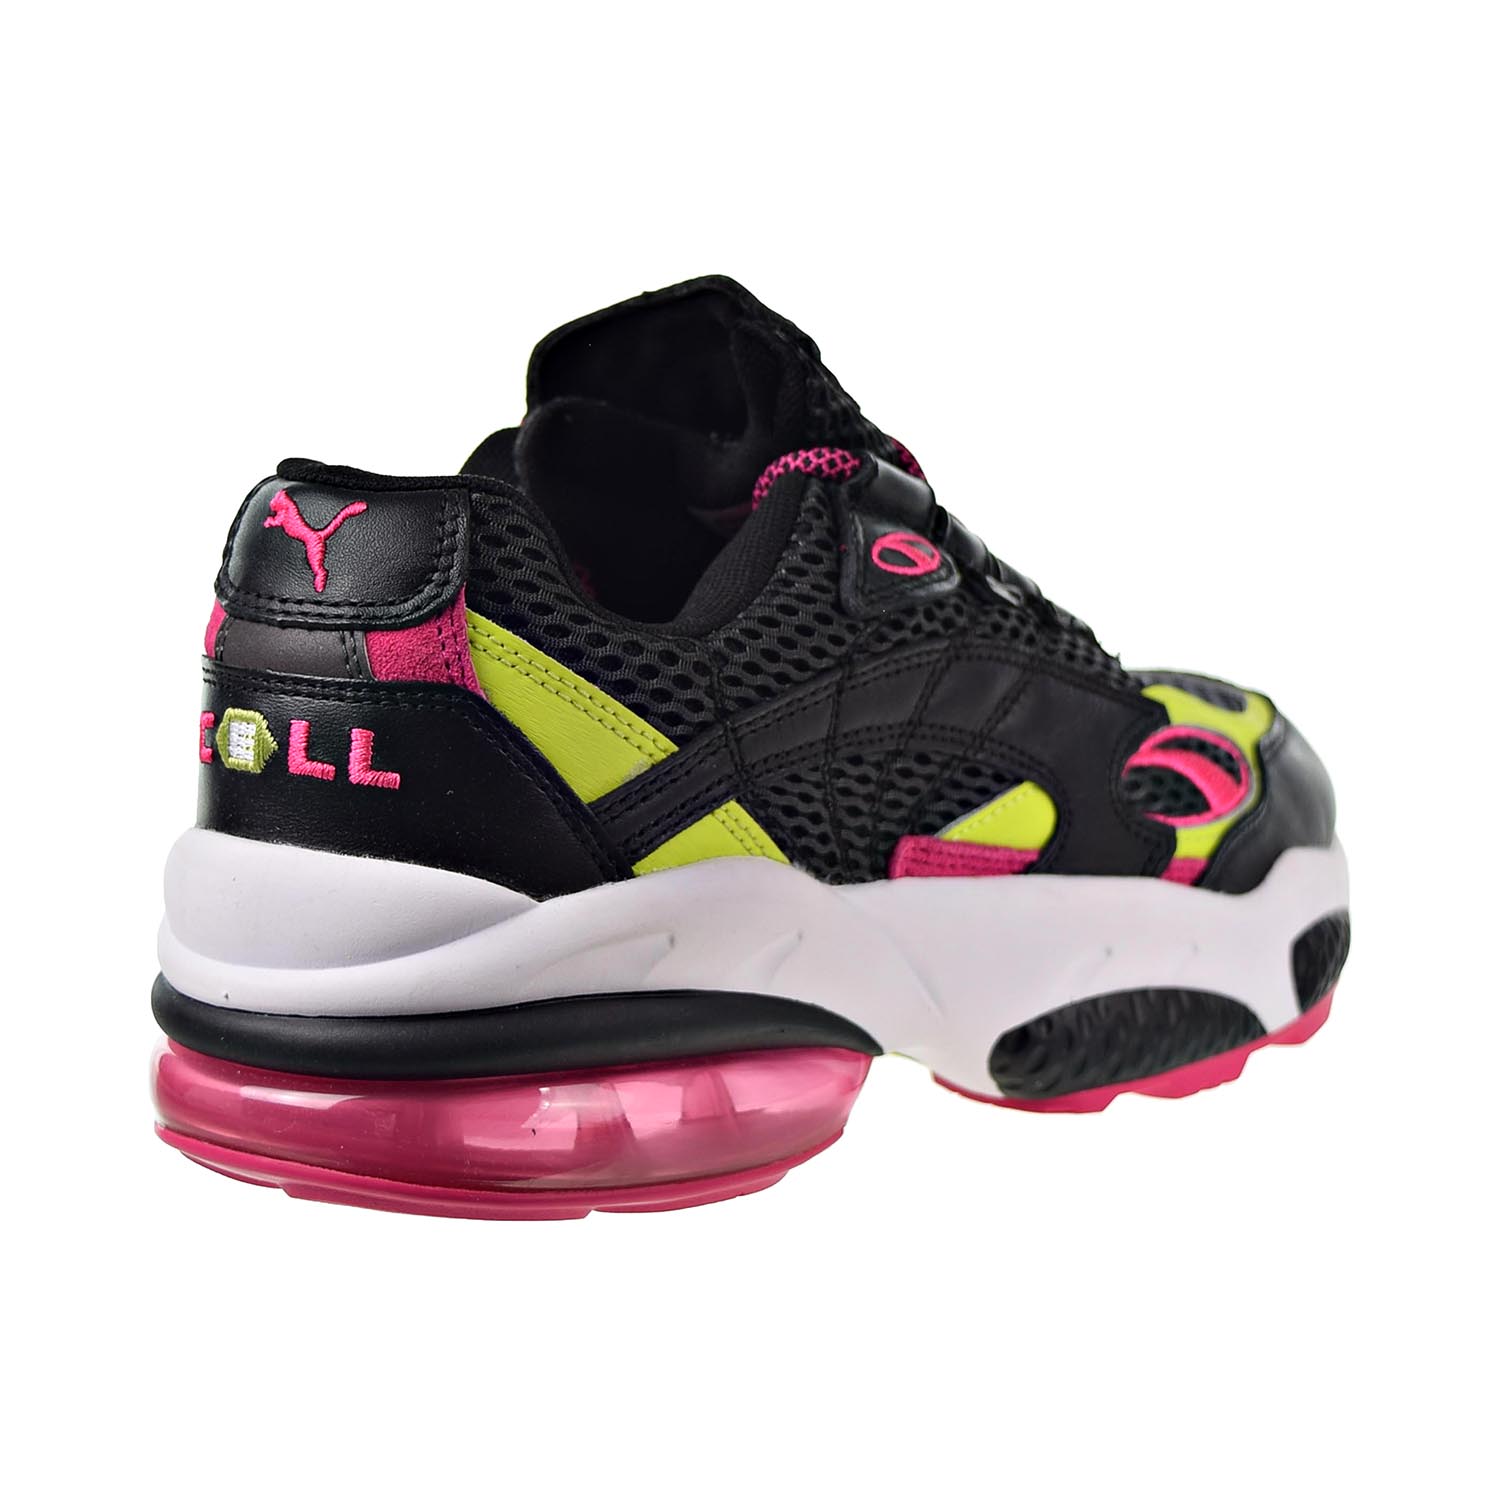 Puma Cell Venom 370417-01 Men Black/Pink/Lime Punch Athletic Running Shoes C1385 (11) - image 3 of 6